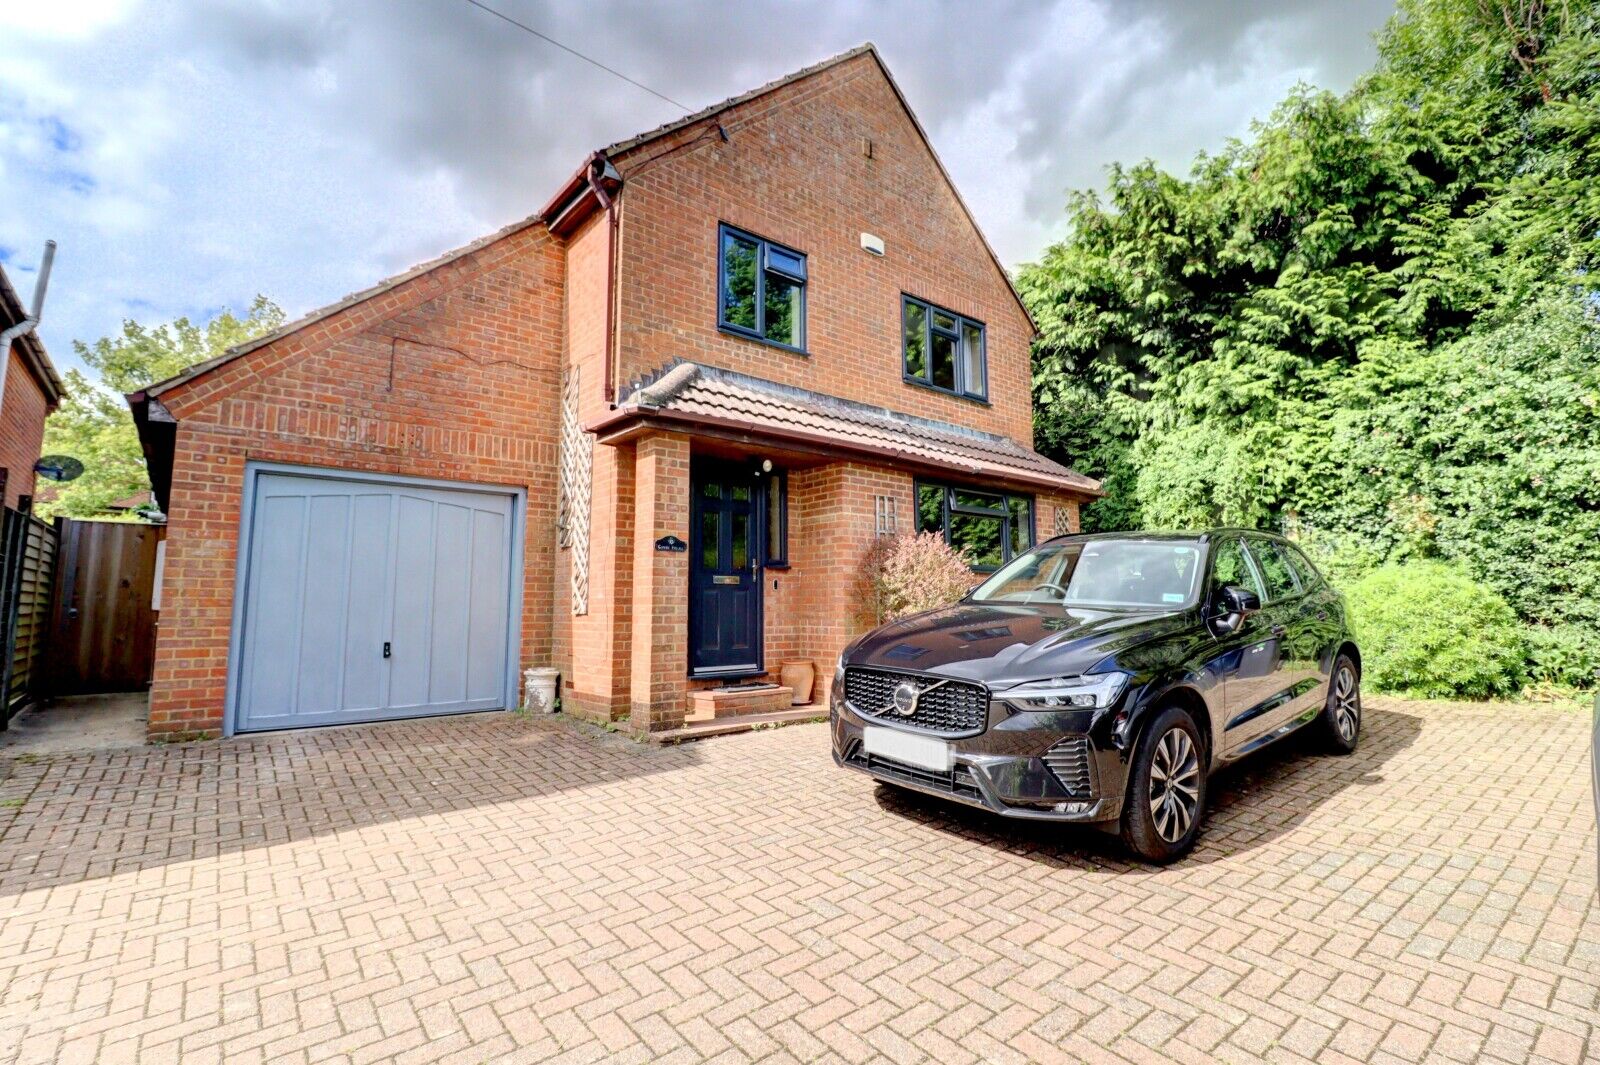 4 bedroom detached house for sale Sunny Bank, High Wycombe, HP15, main image